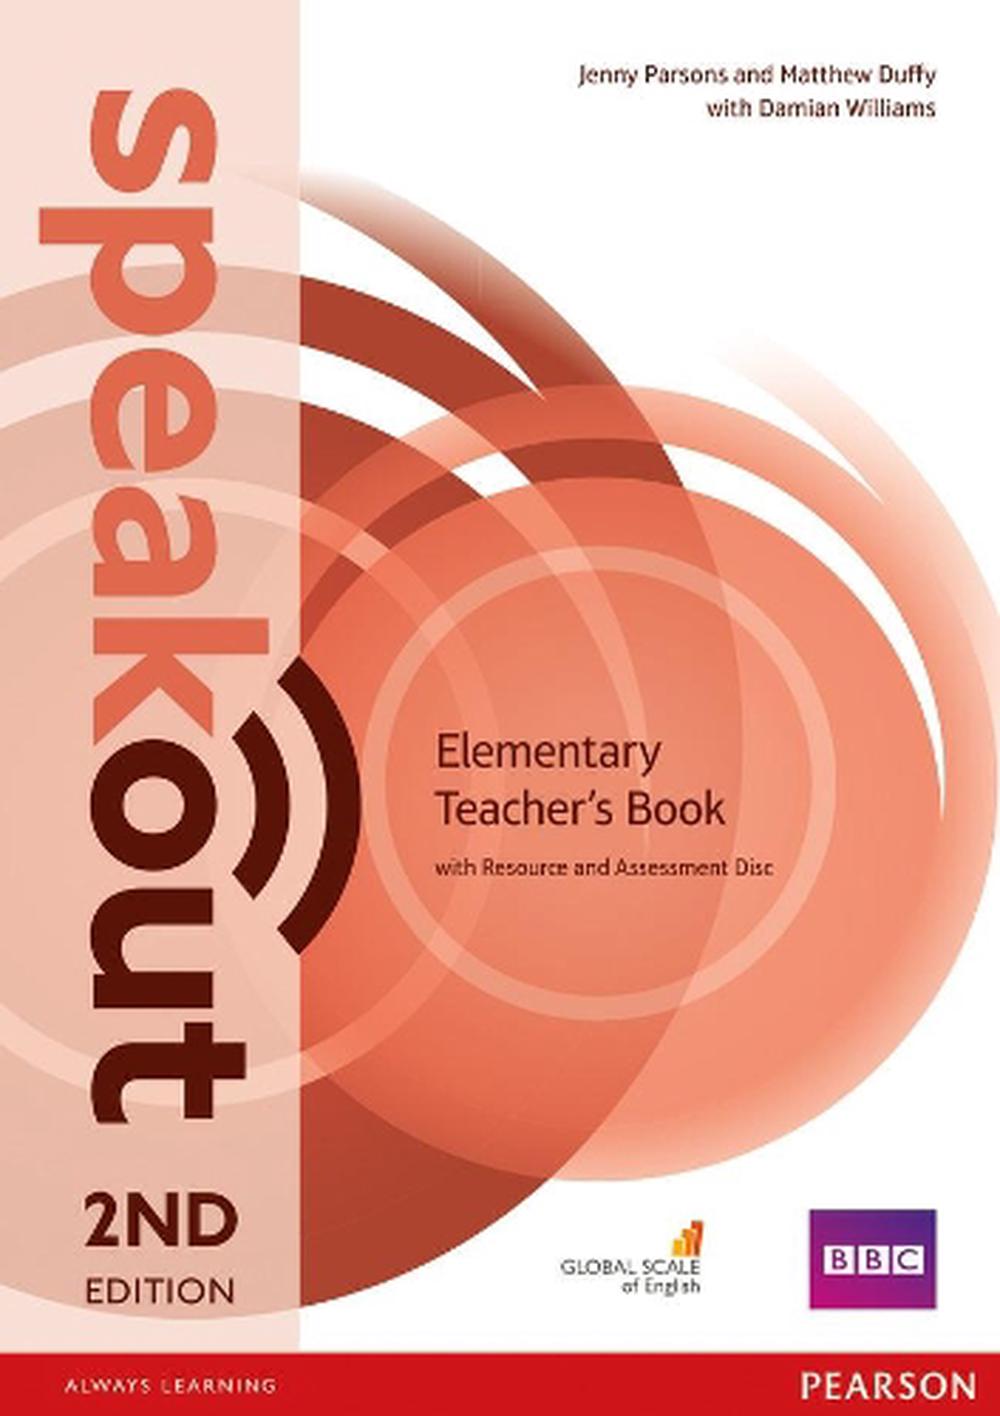 Speakout Elementary 2nd Edition Teacher's Guide With Resource